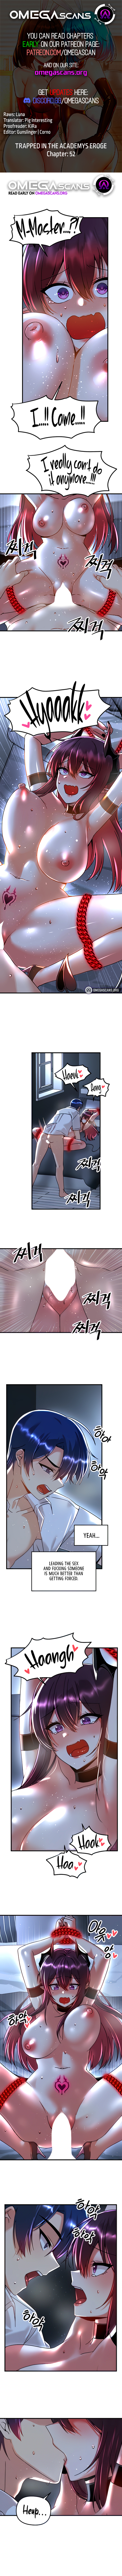 Panel Image 1 for chapter 52 of manhwa Trapped in the Academy